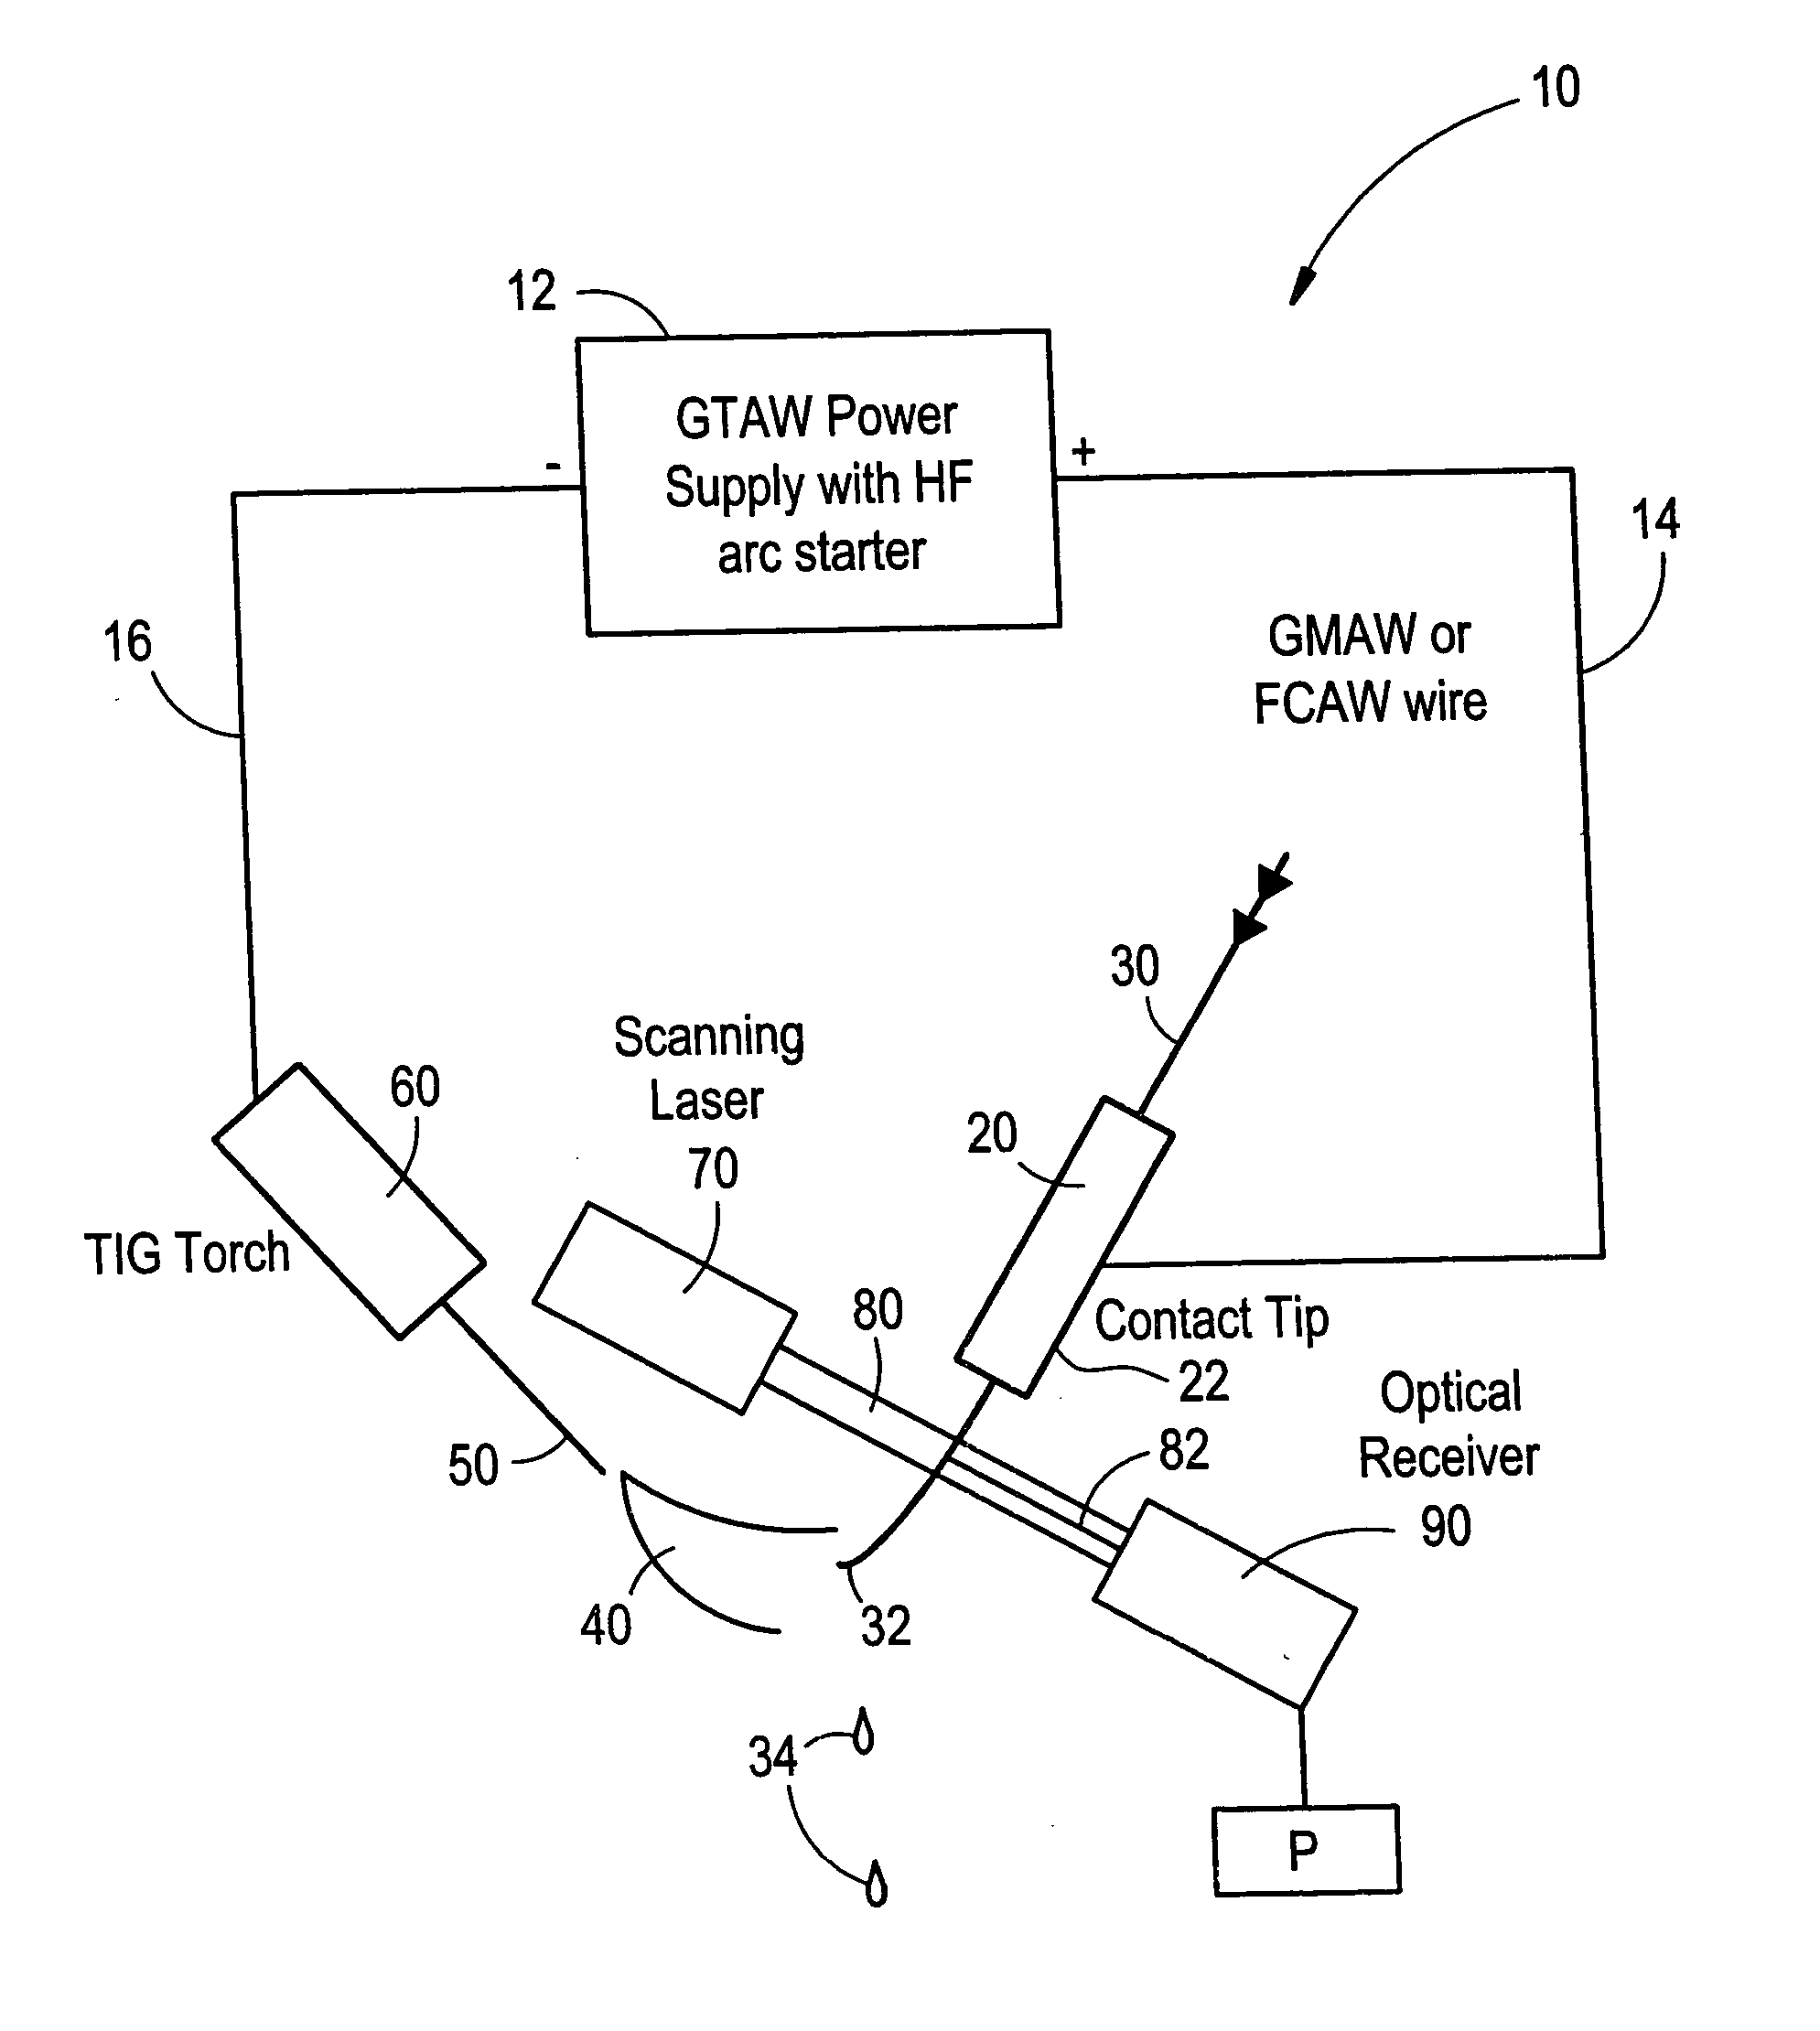 Welding wire positioning system